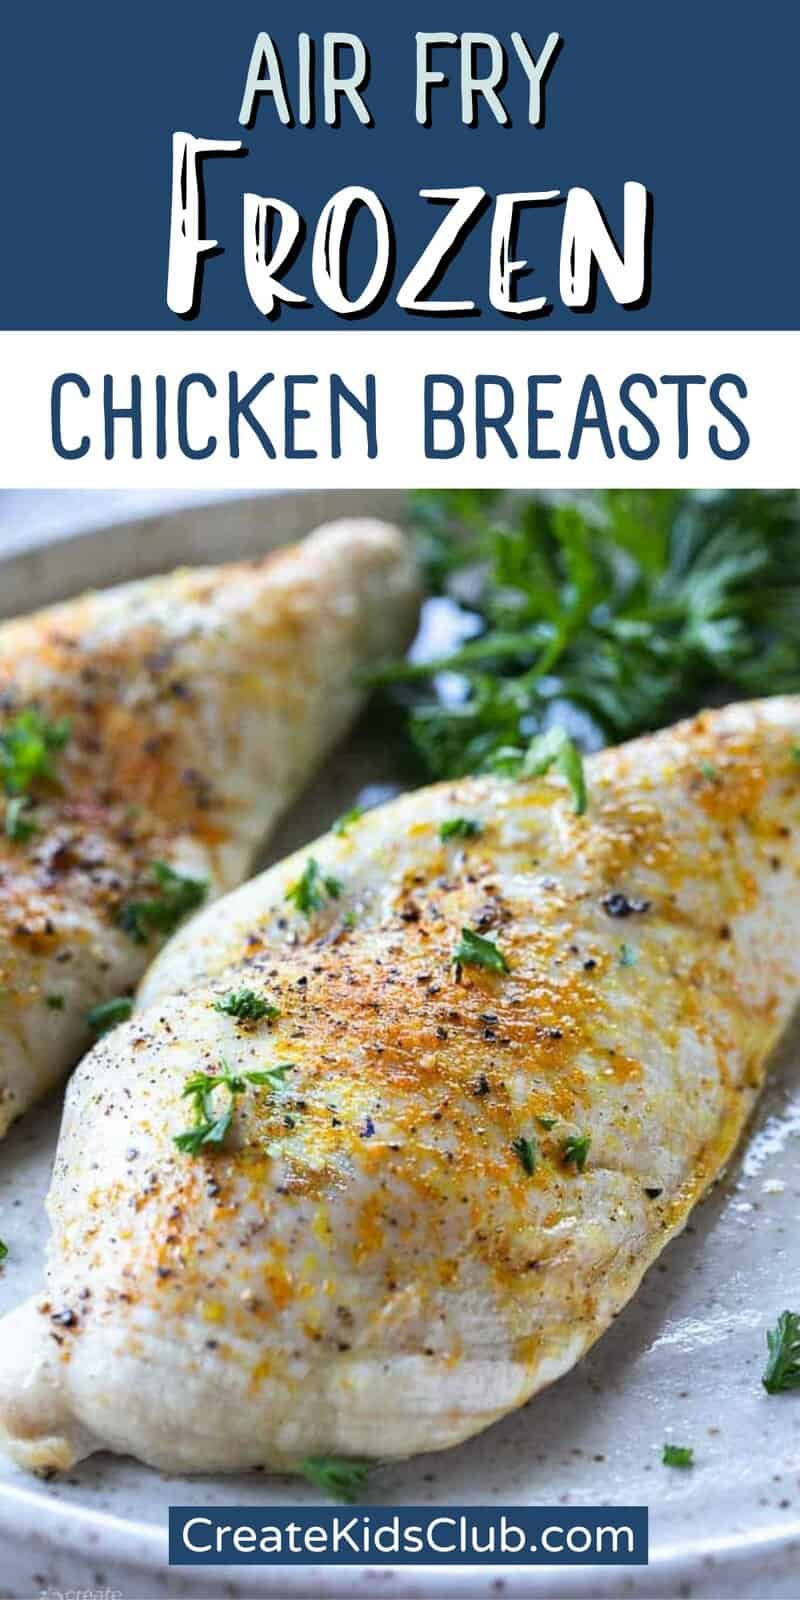 Pinterest image of air fry frozen chicken breasts